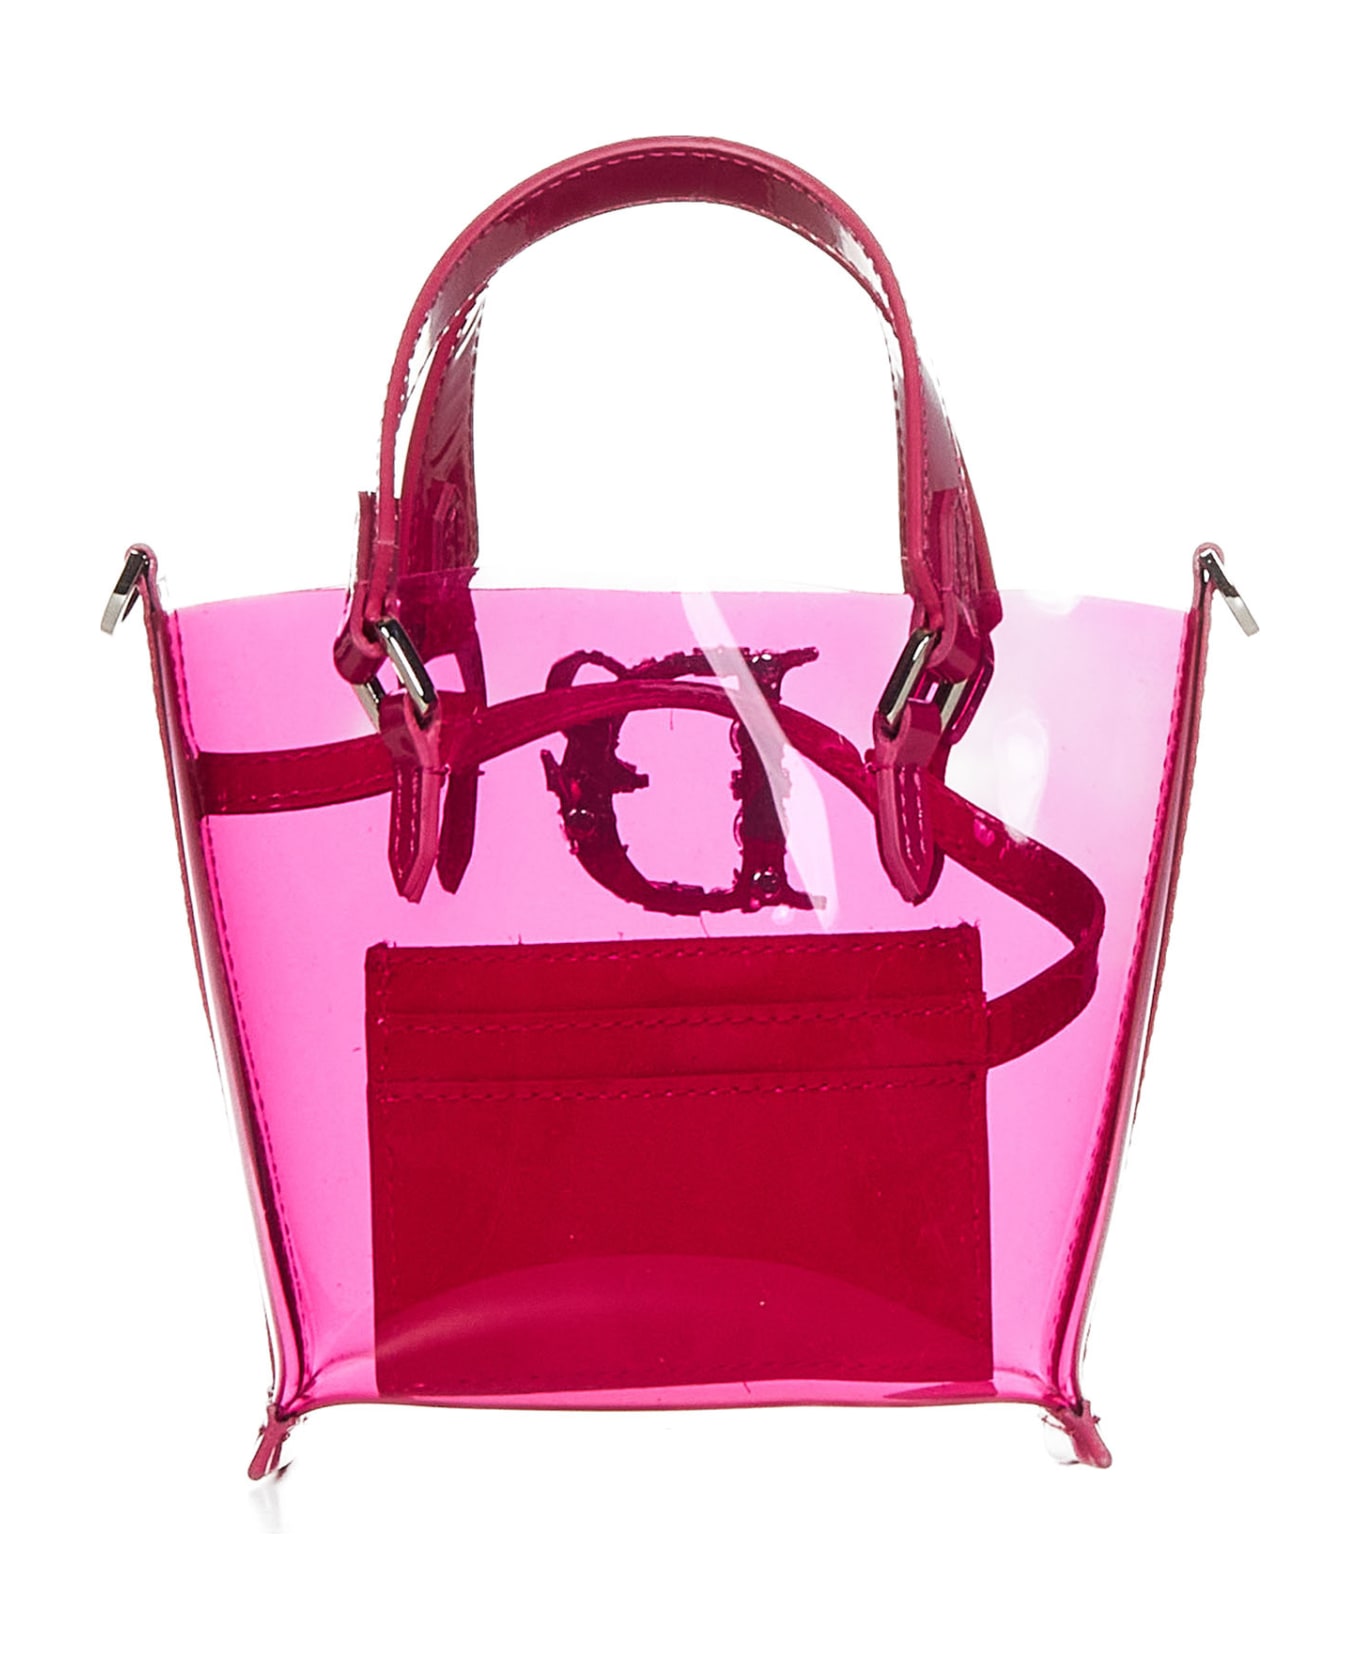 Dsquared2 Tote - Fuxia トートバッグ